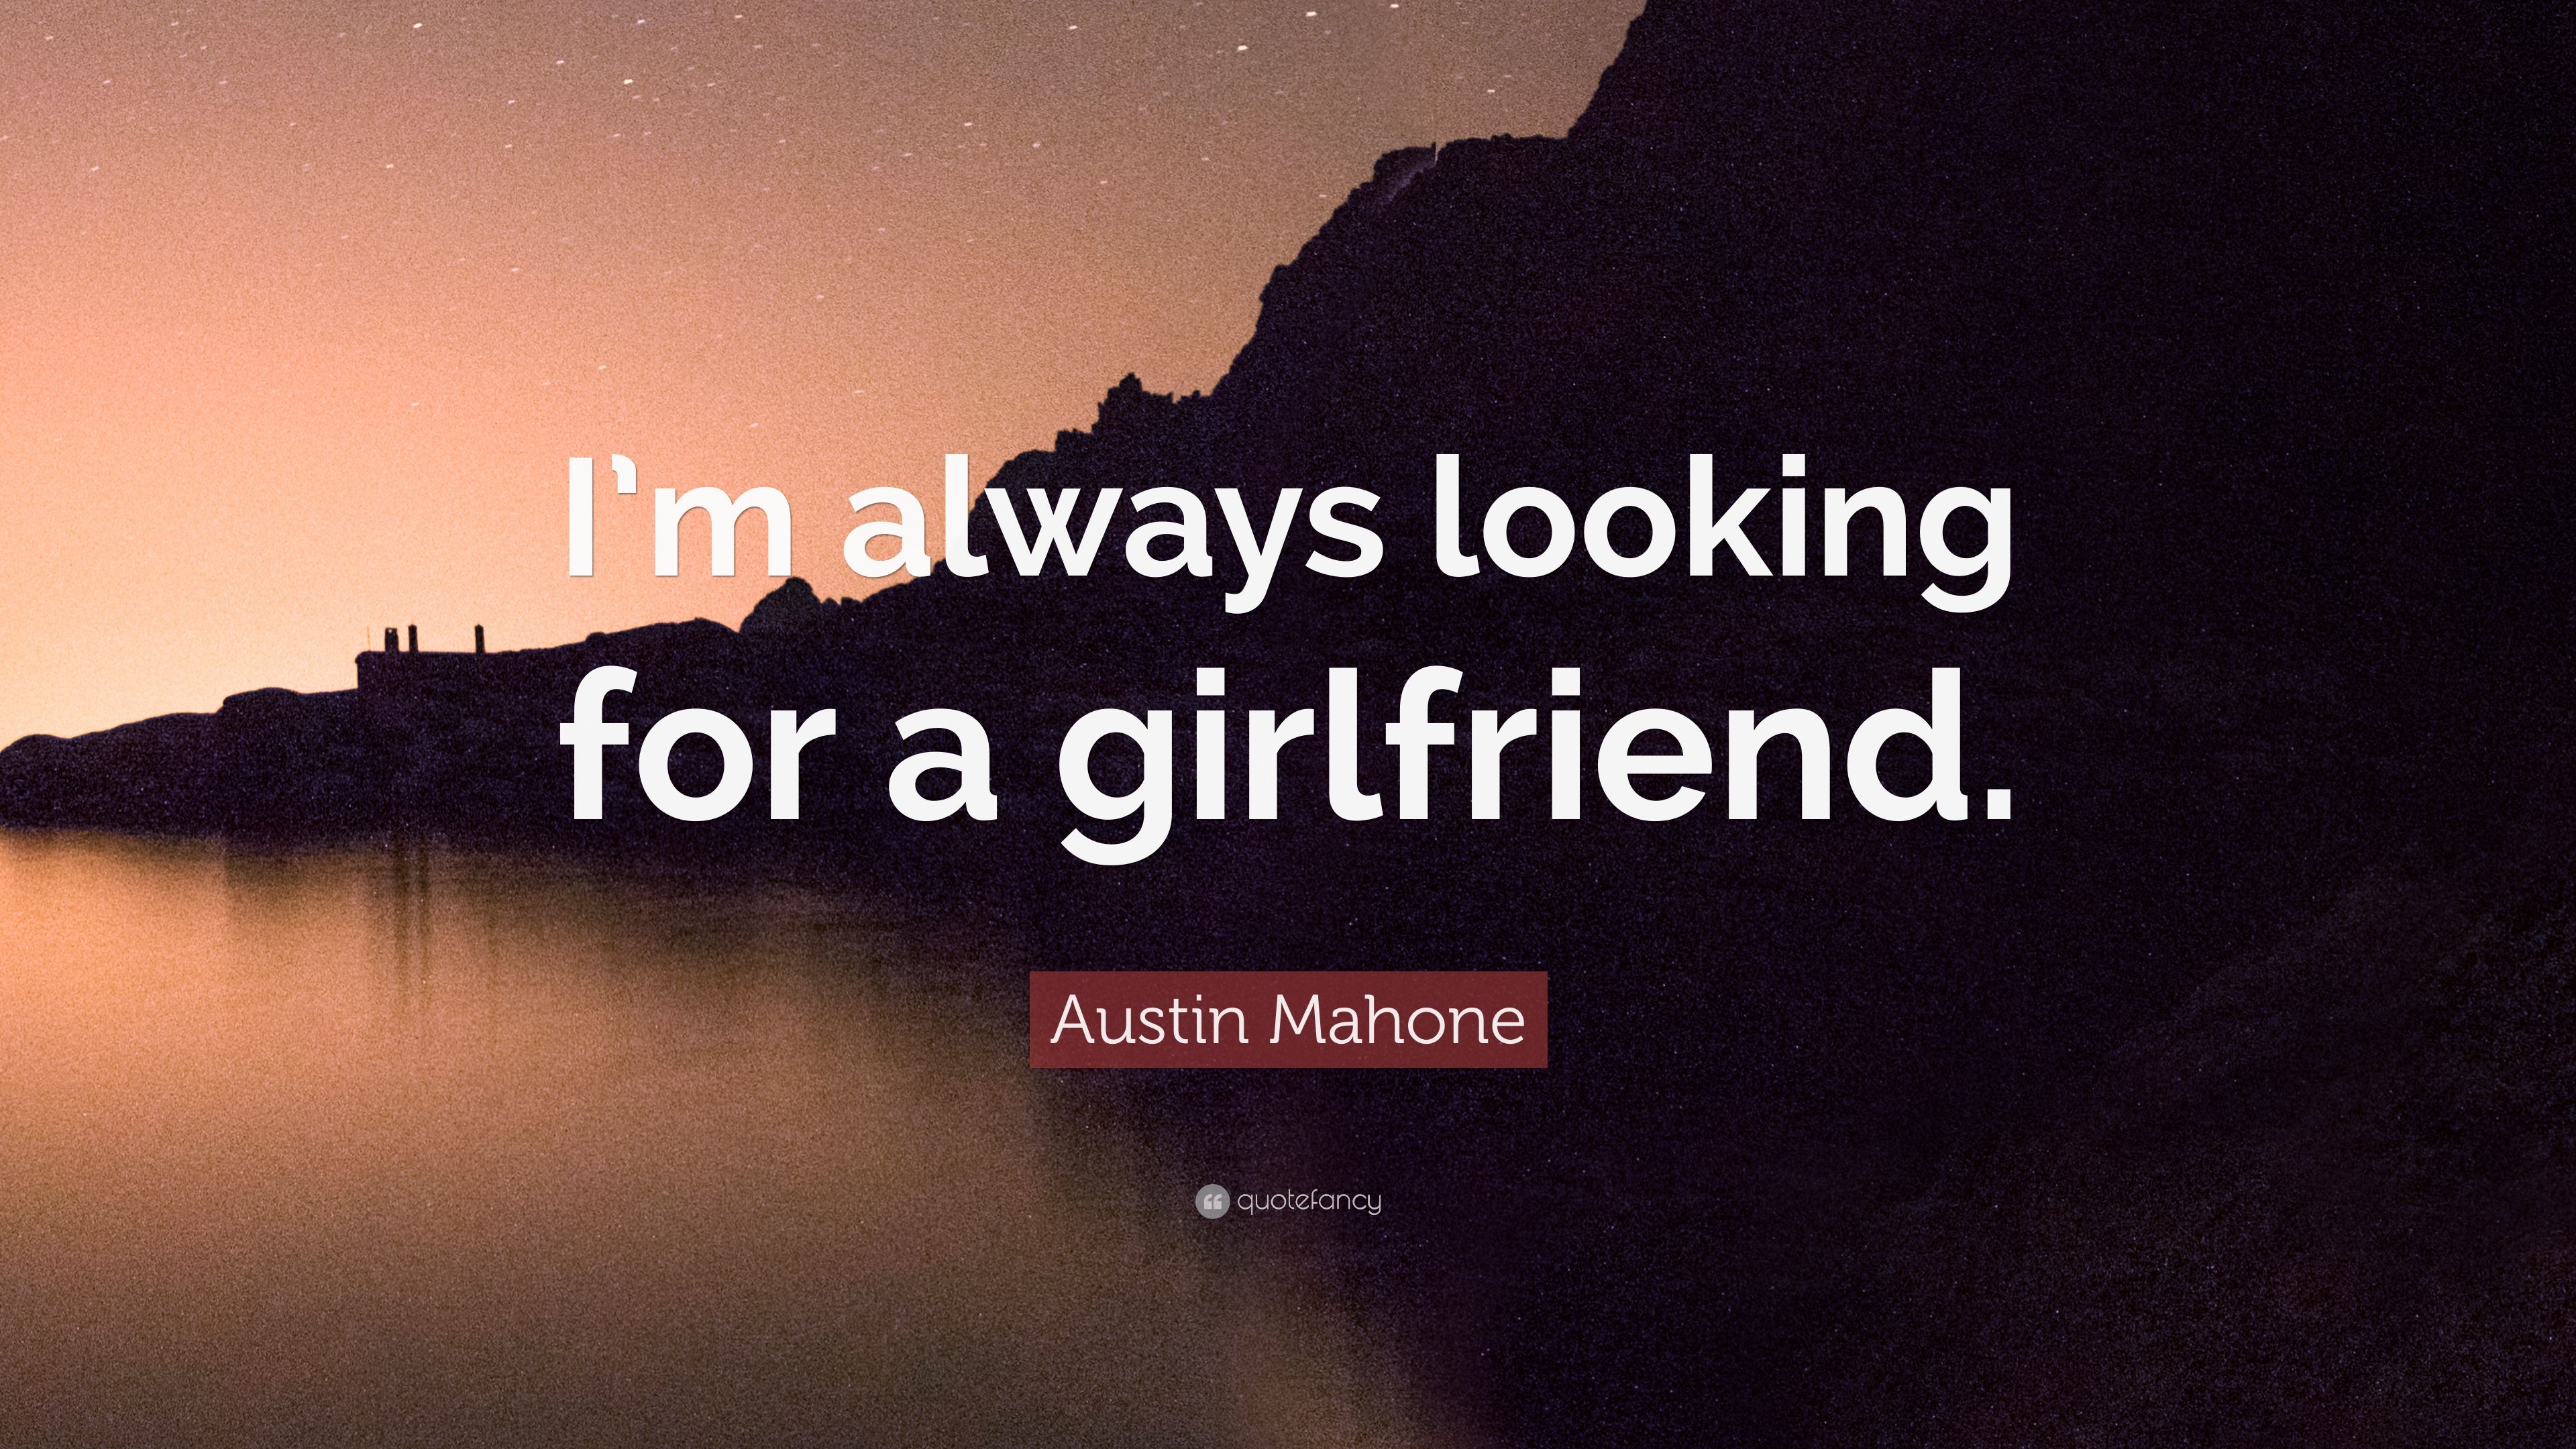 Austin Mahone Quote - Dont Tell Me What They Said About Me - HD Wallpaper 